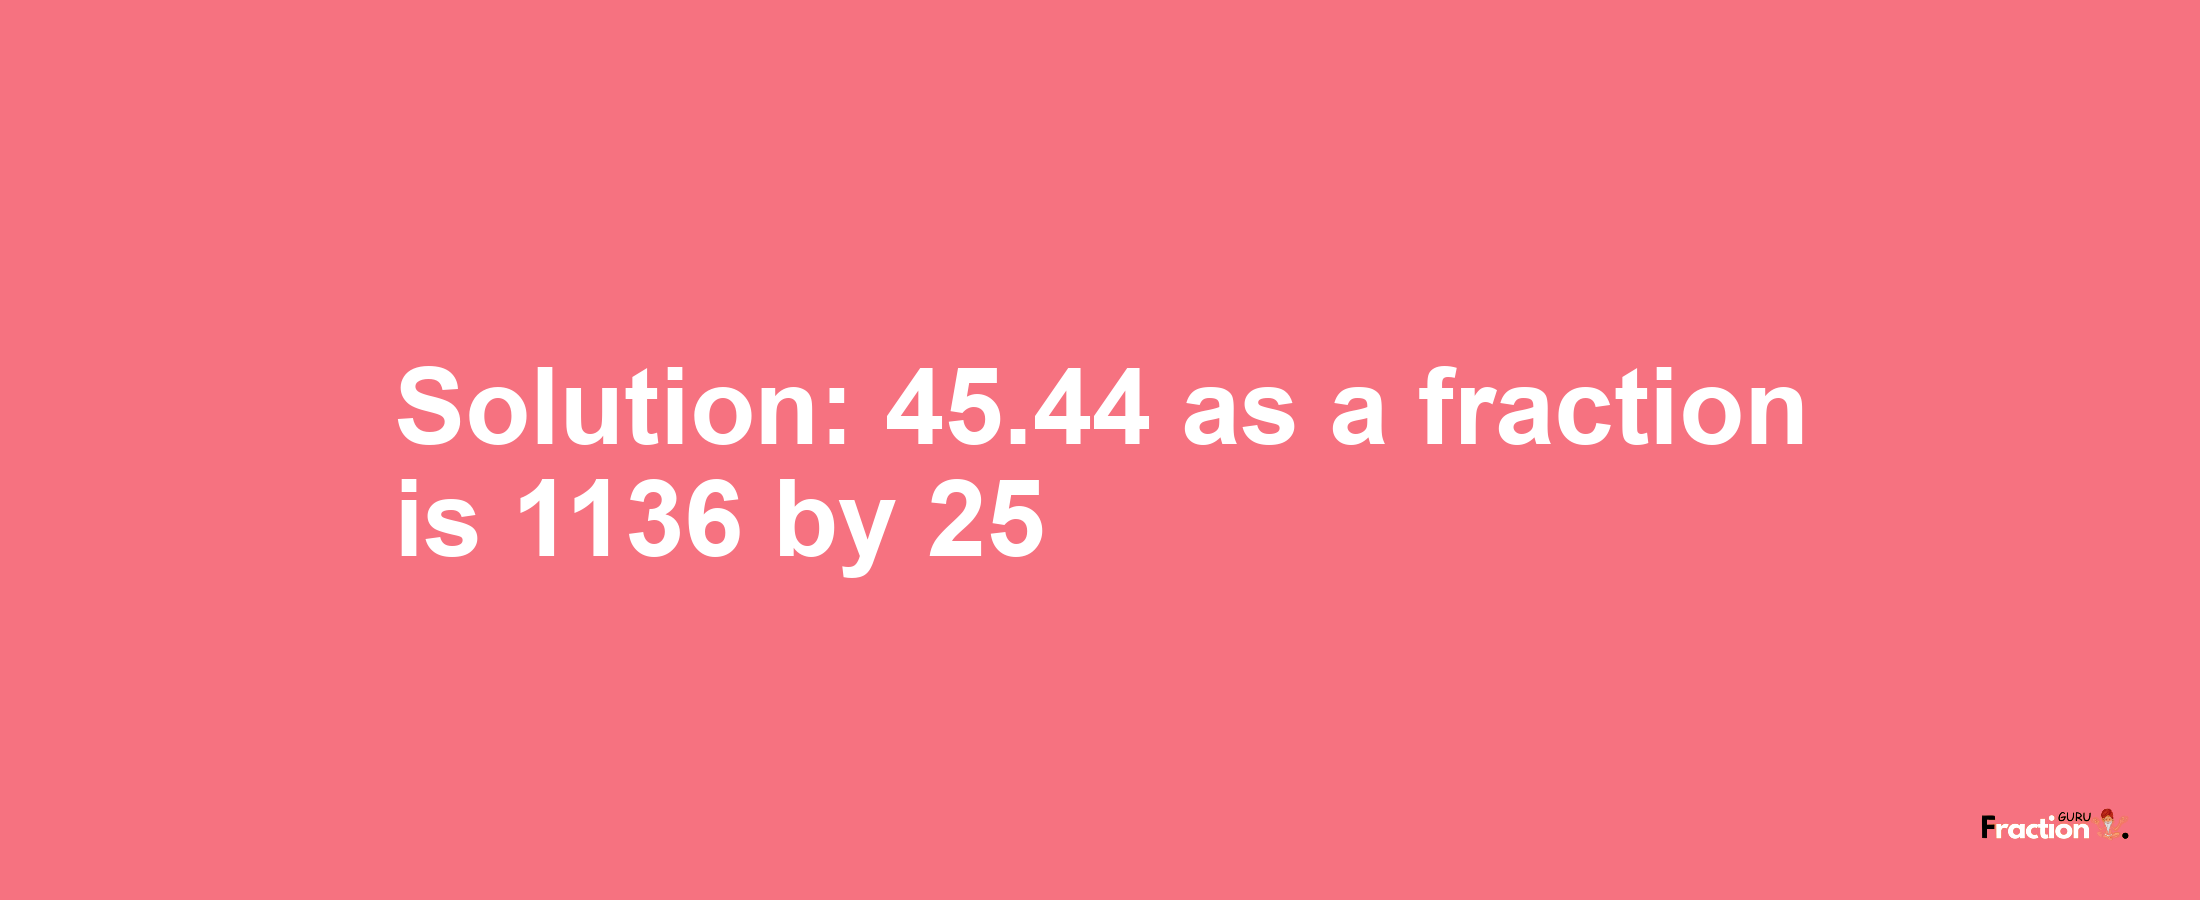 Solution:45.44 as a fraction is 1136/25